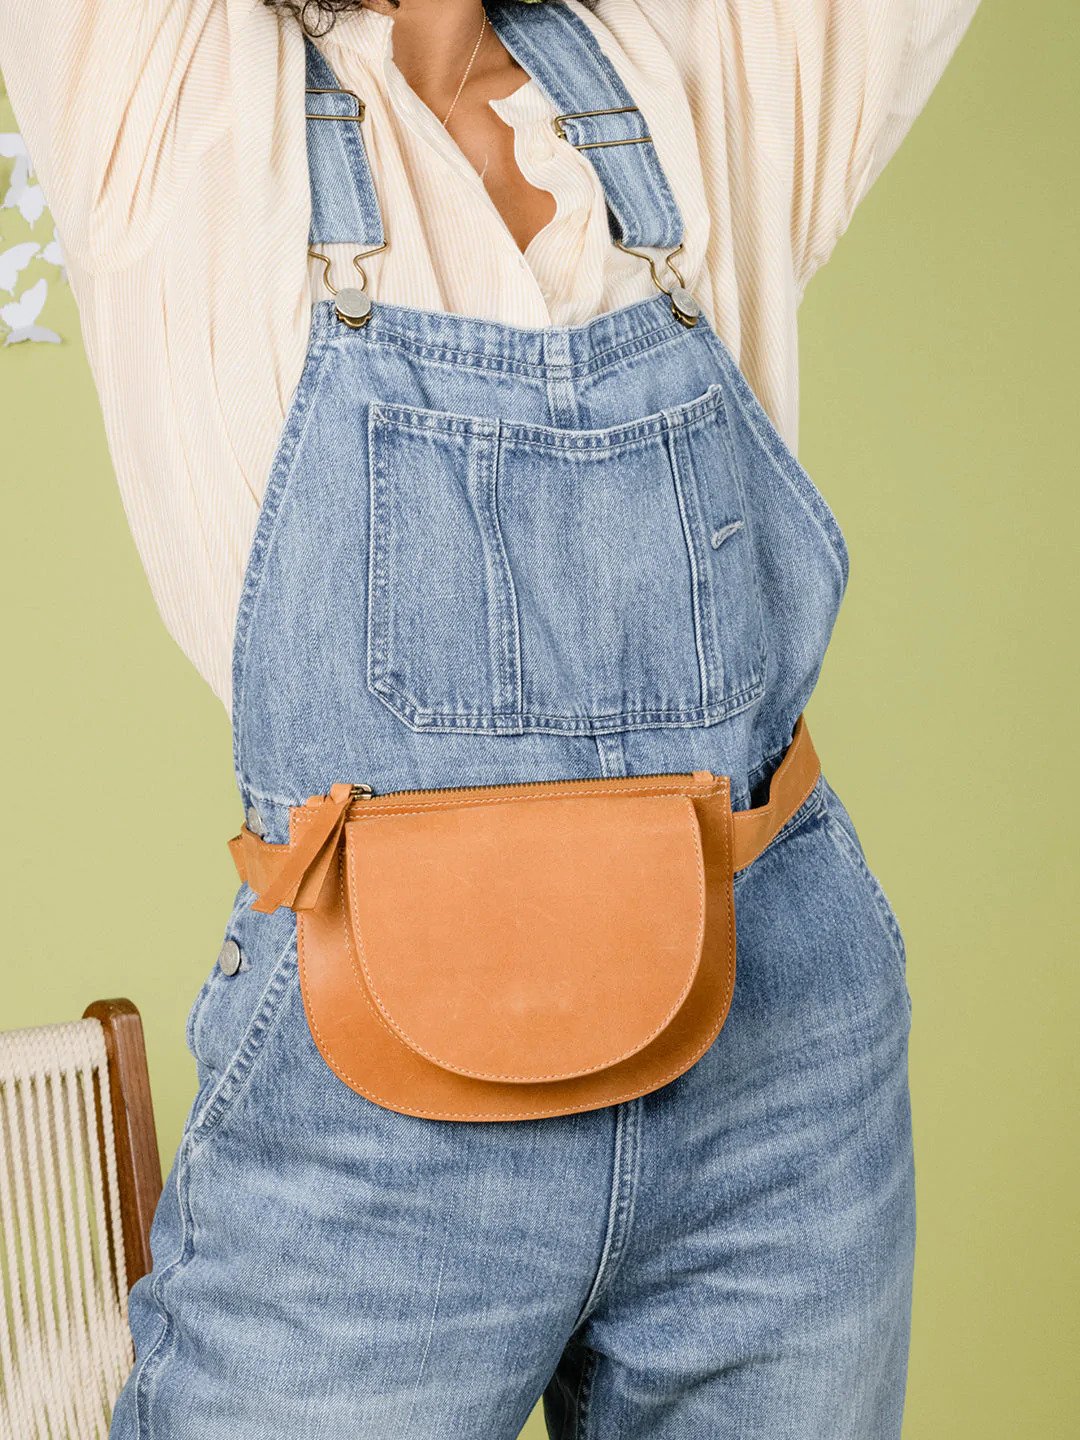 torso shot of person wearing overalls and cognac leather belt bag with lime green wall behind them - ABLE Sale 2022 Picks